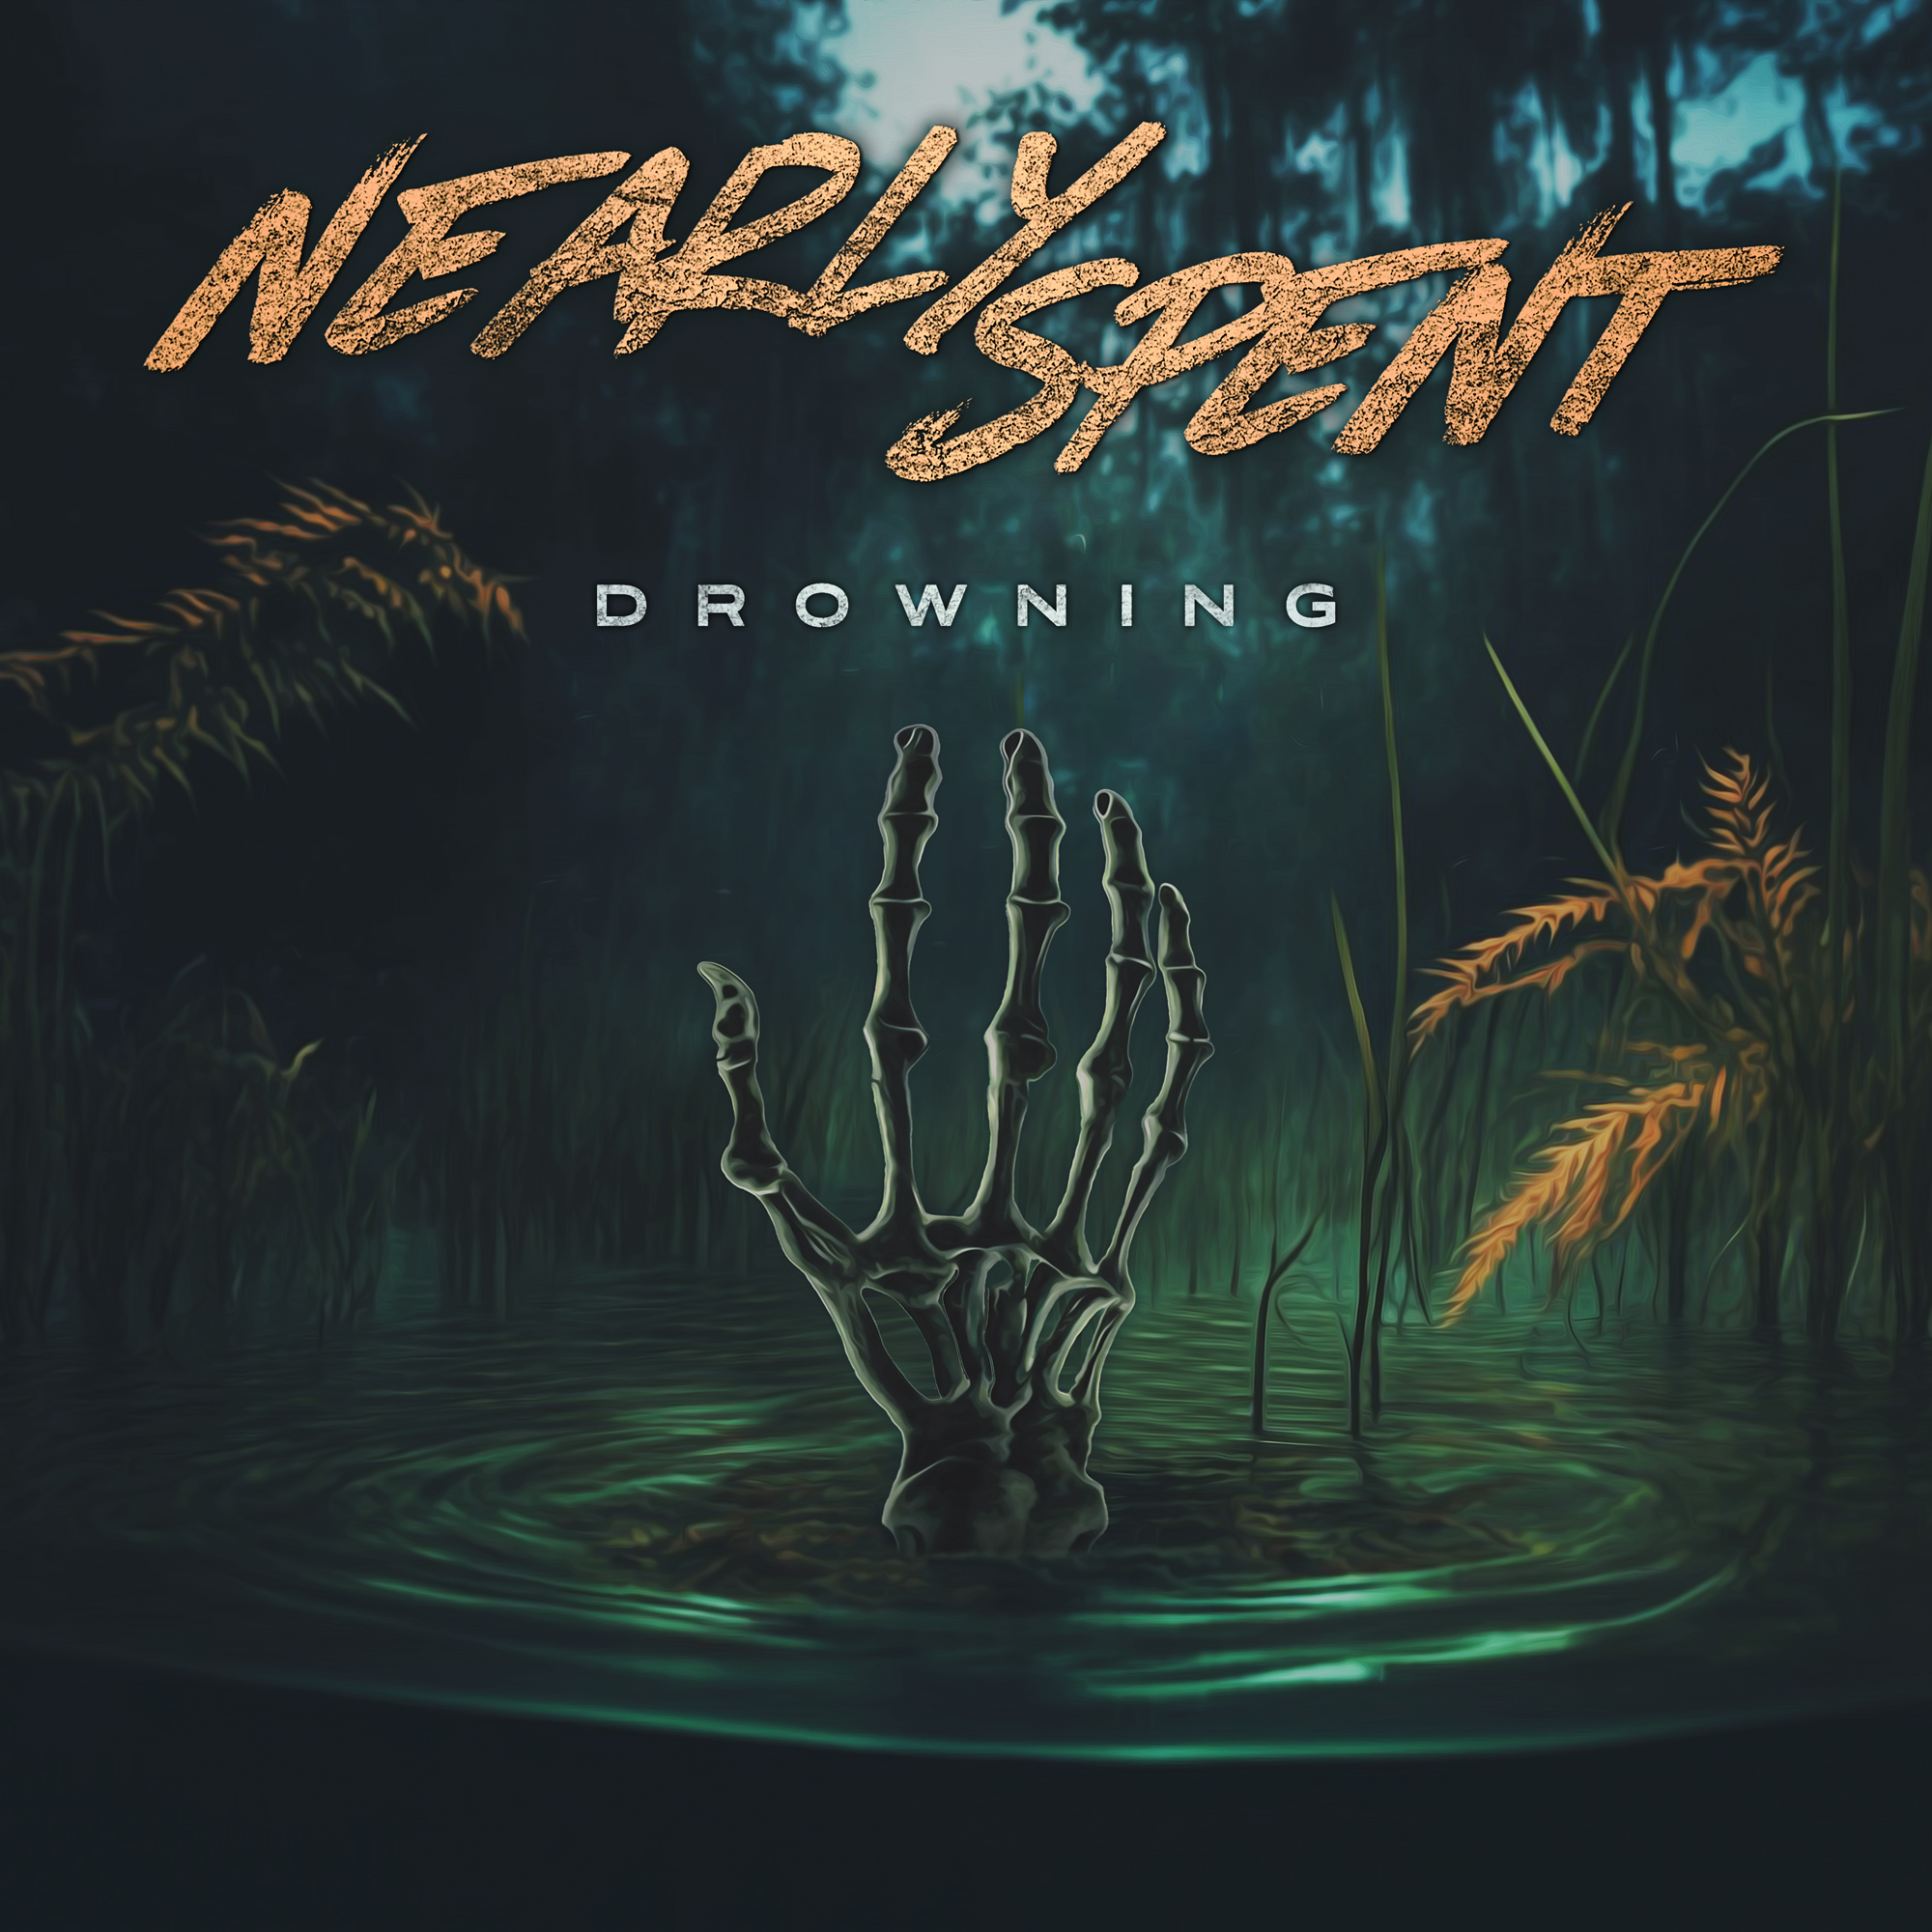 HOT TRACK: “Drowning” by Nearly Spent